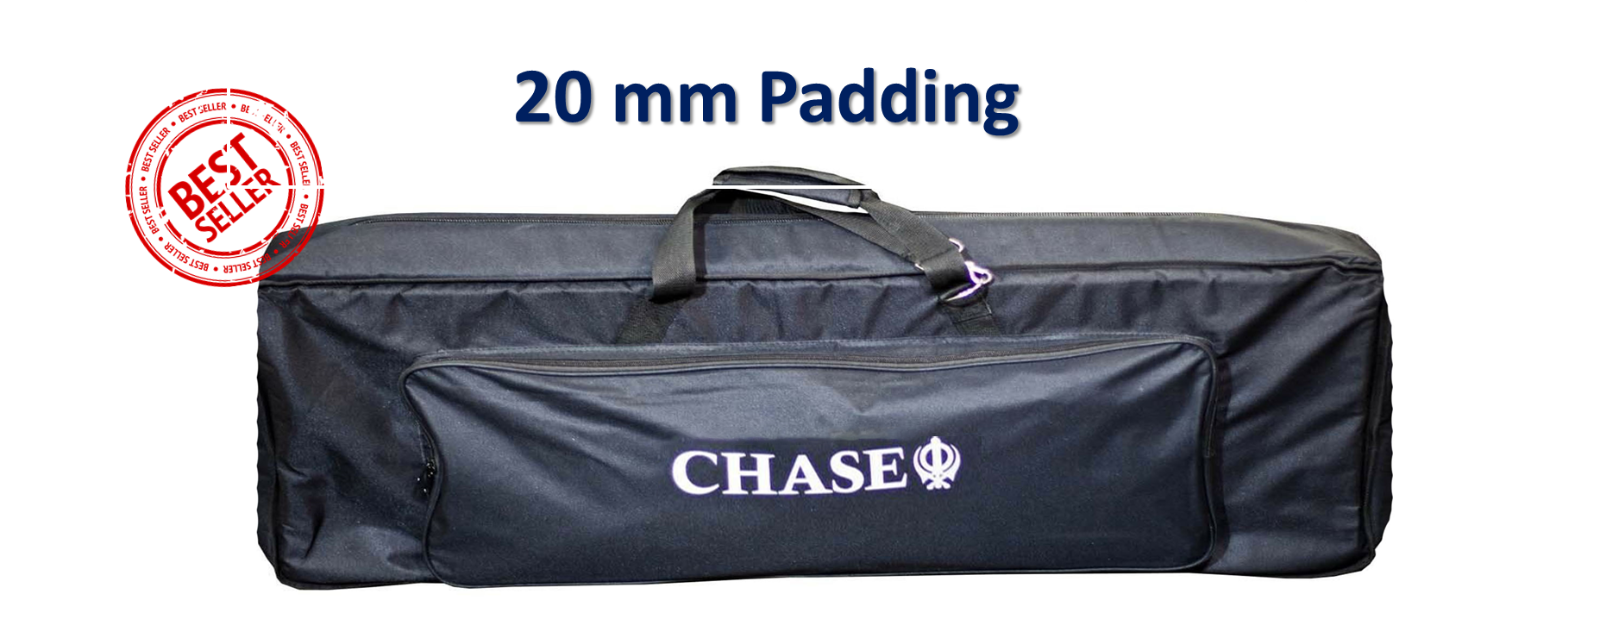 Chase Digital Stage Piano Keyboard Gig Bag Case For 88 Notes Keys 1360mm x 346mm x 154mm